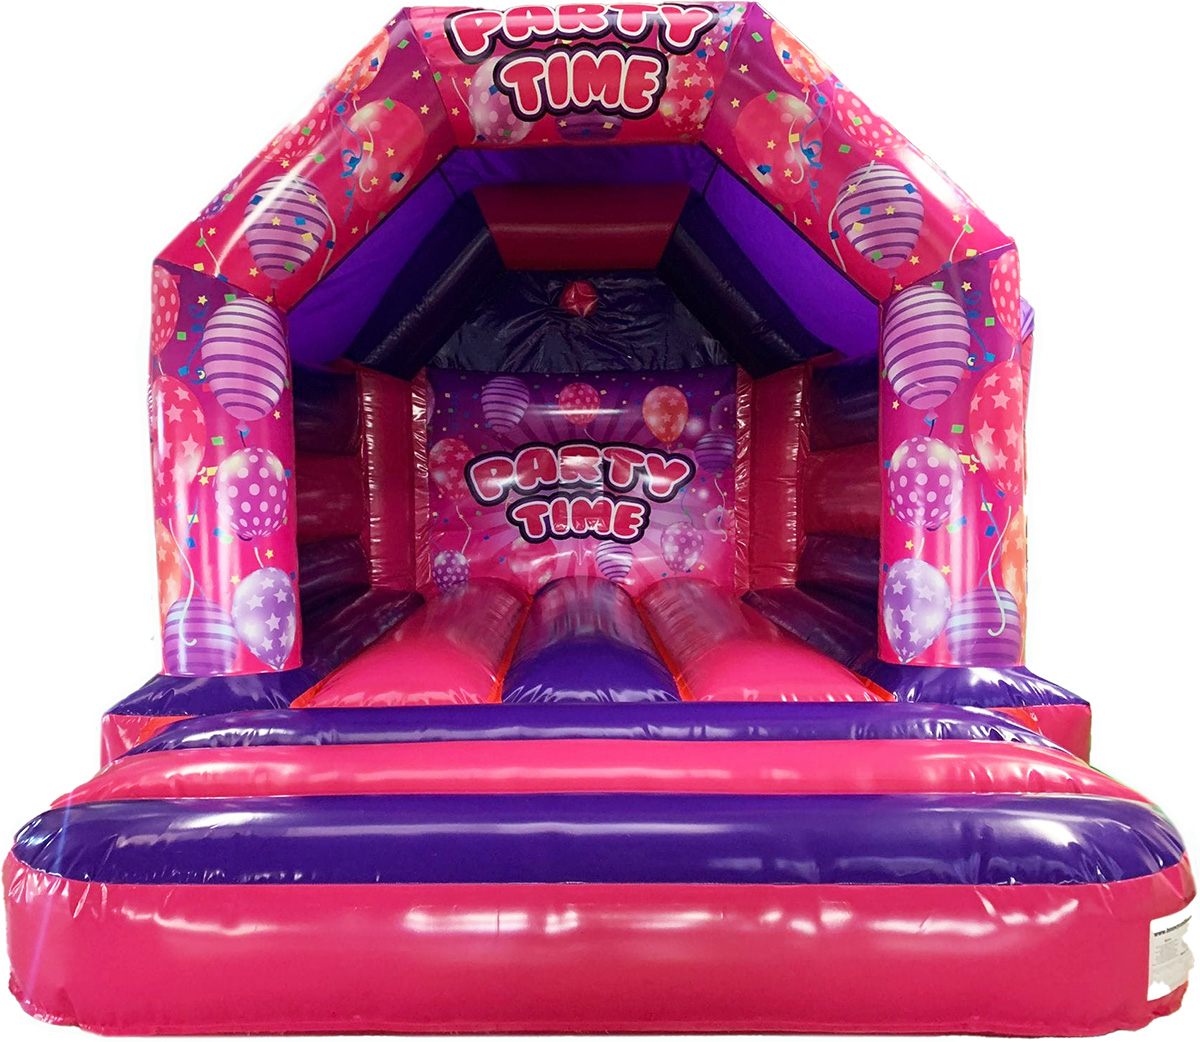 Bouncy Castle Sales - BC718 - Bouncy Inflatable for sale